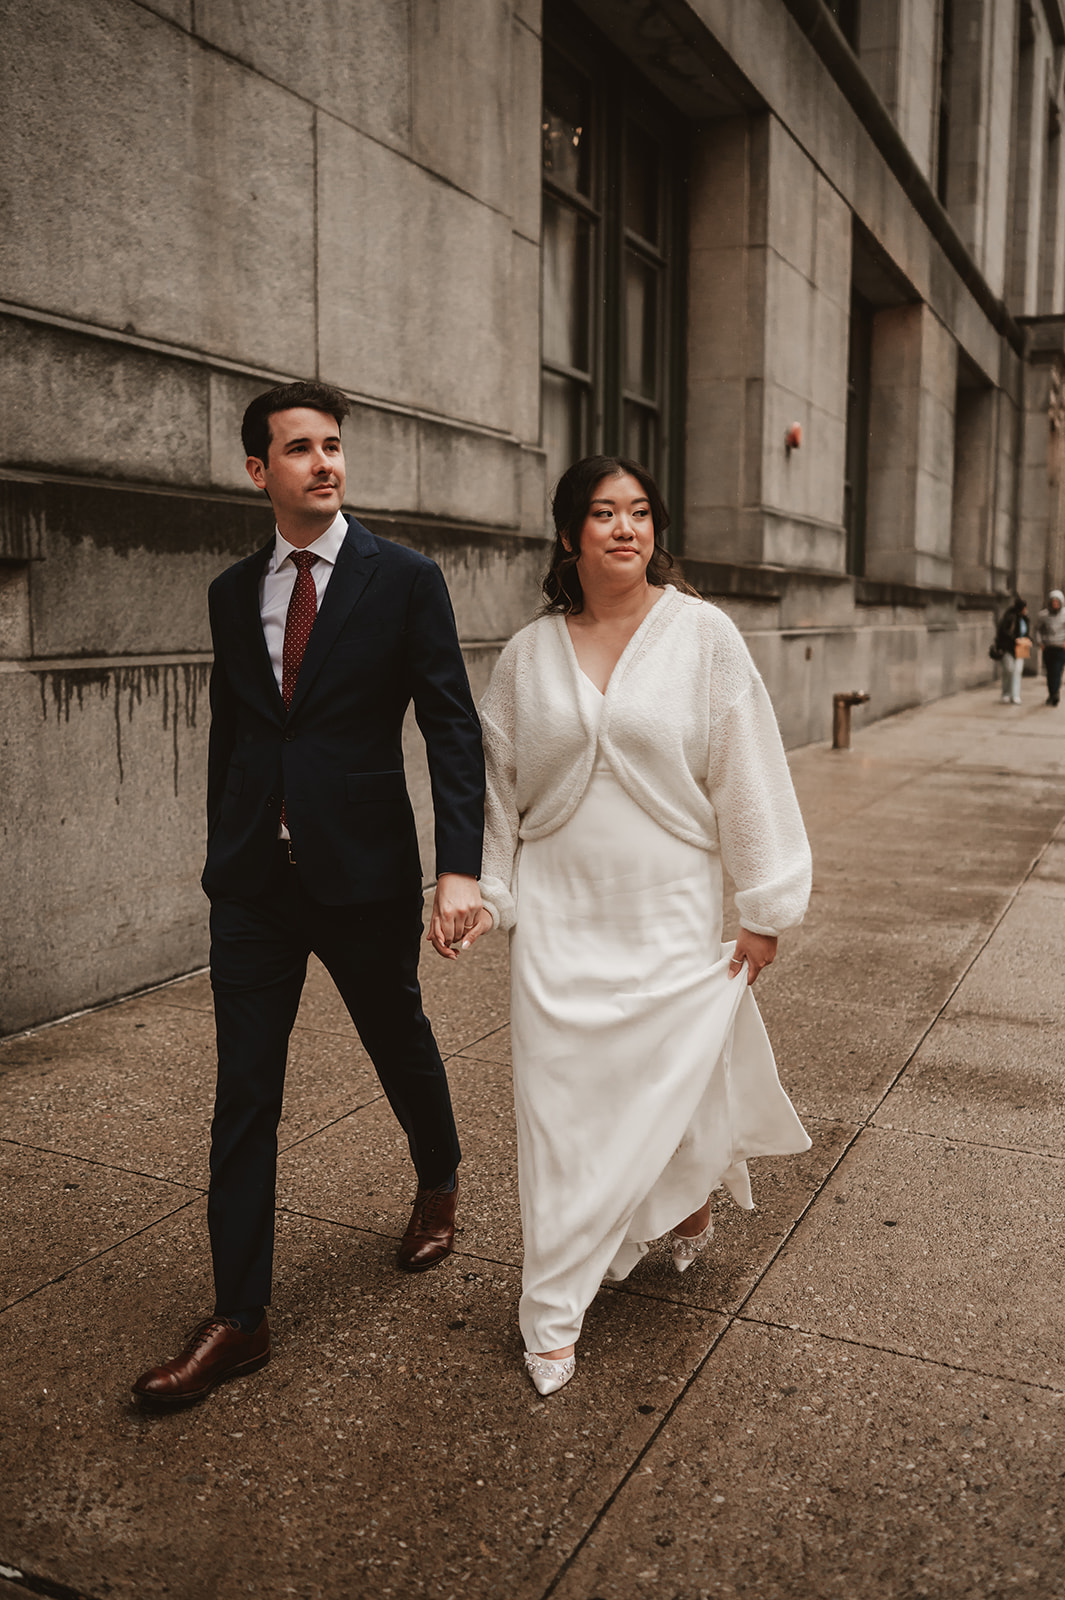 Intimate rainy day Chicago elopement wedding photography - walking through the streets of Chicago